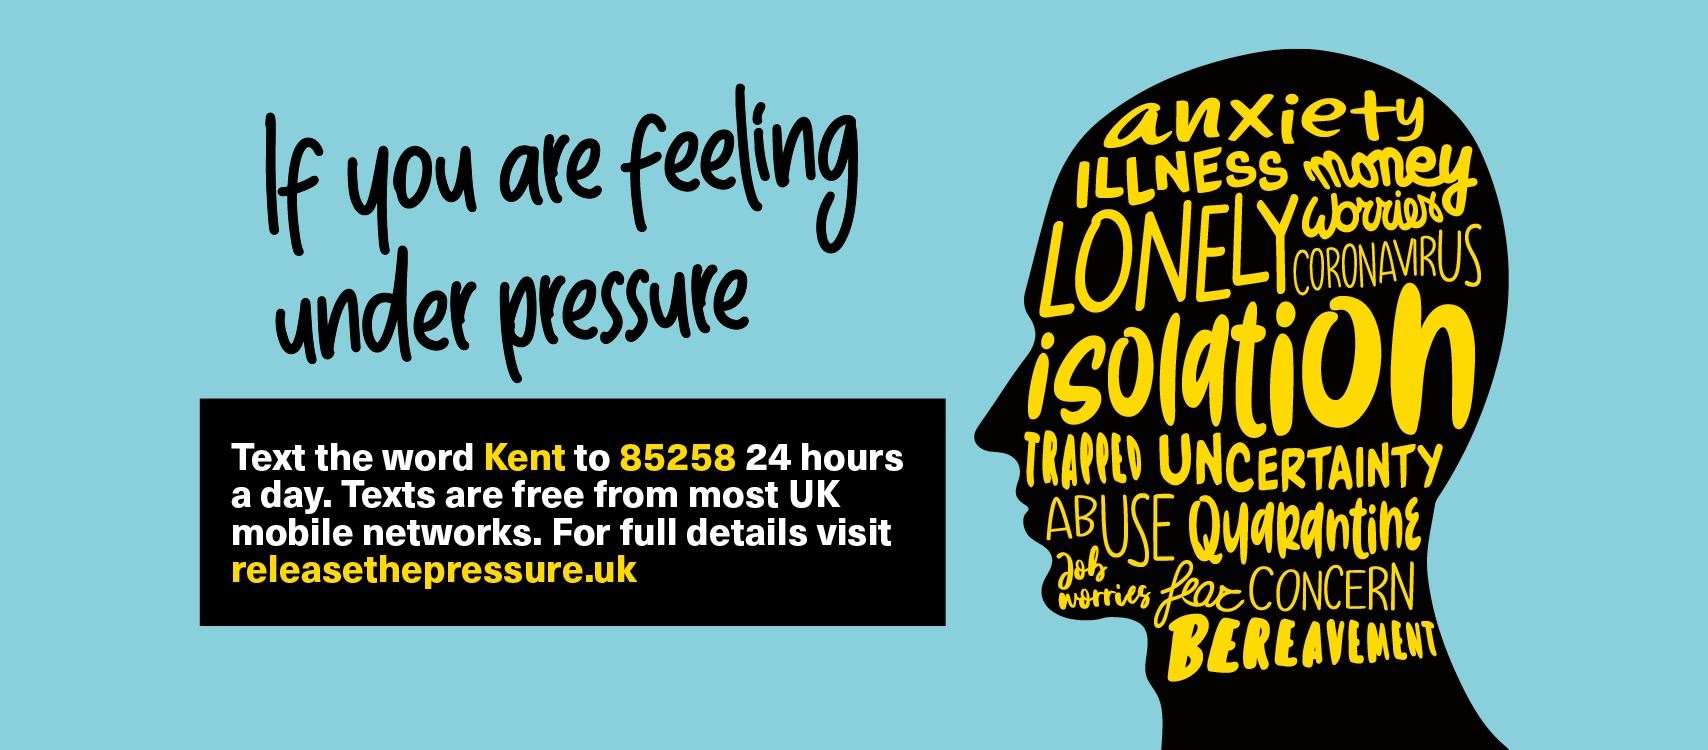 Don’t suffer in silence: text the word 'Kent' or 'Medway' to 85258